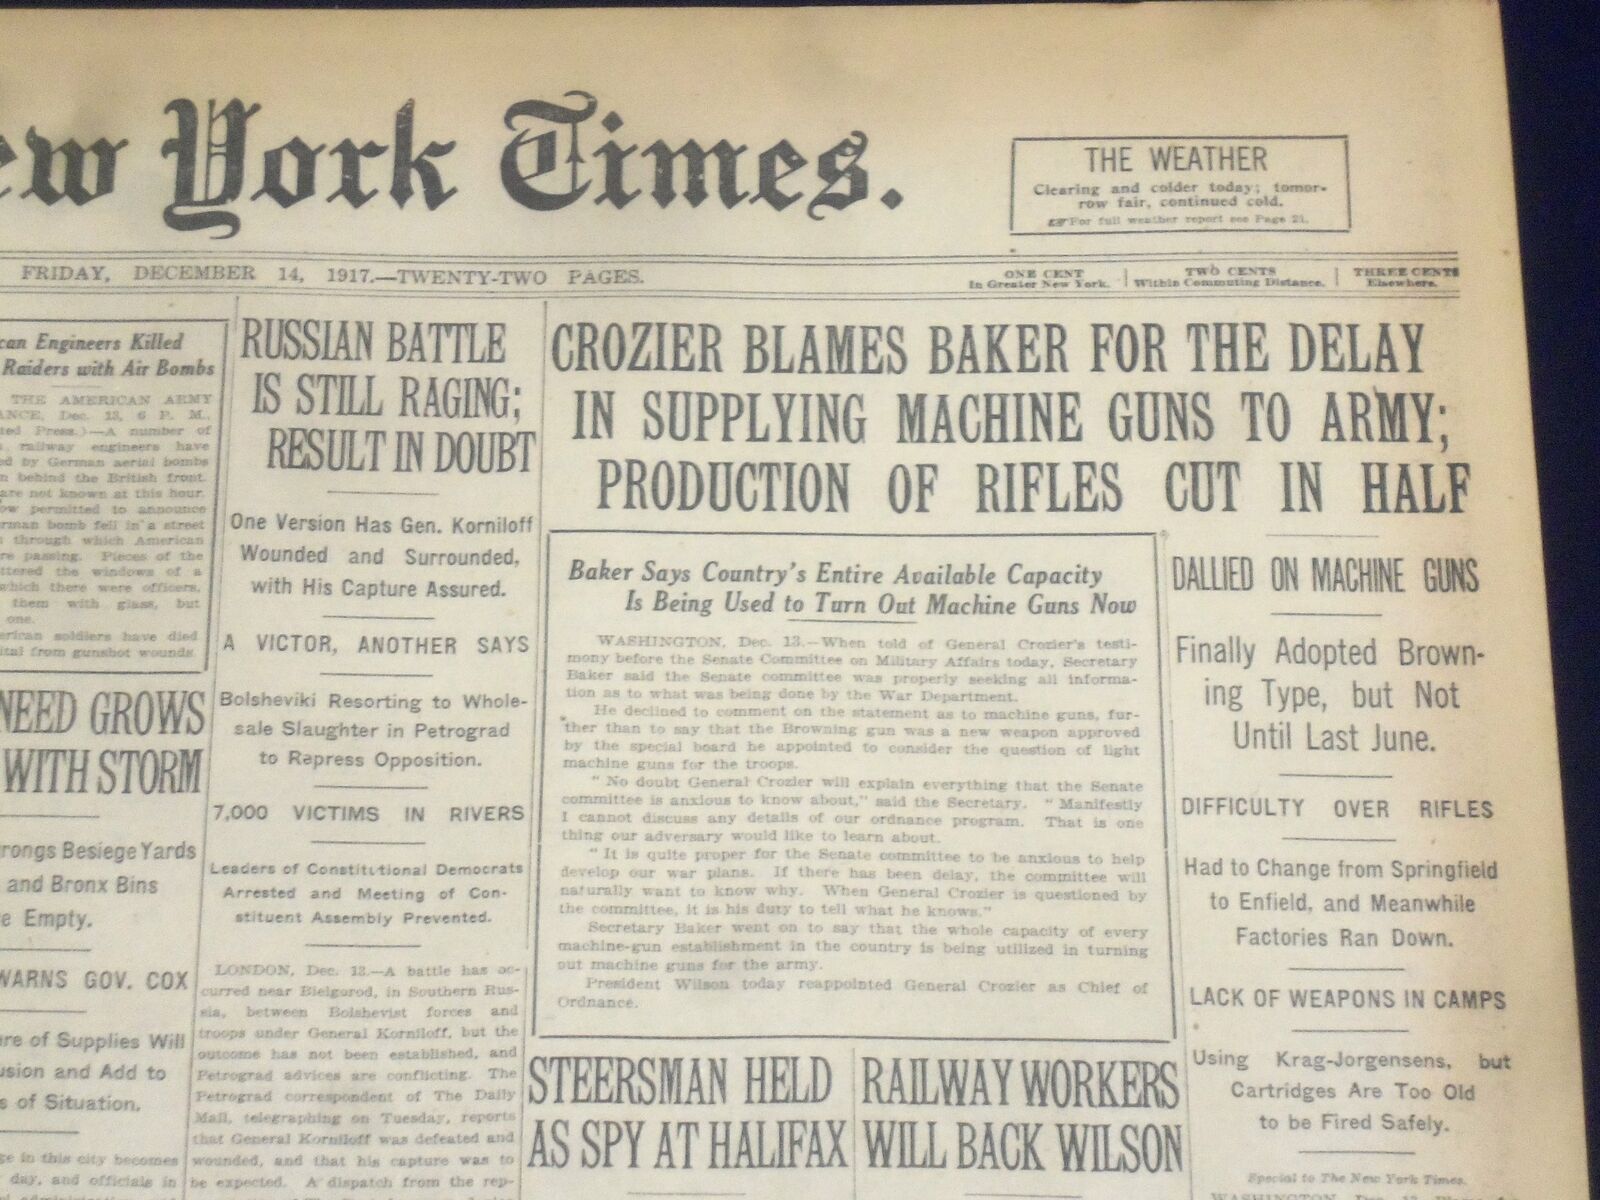 1917 DECEMBER 14 NEW YORK TIMES- DELAY IN SUPPLYING MACHINE GUNS TO ARMY-NT 8261